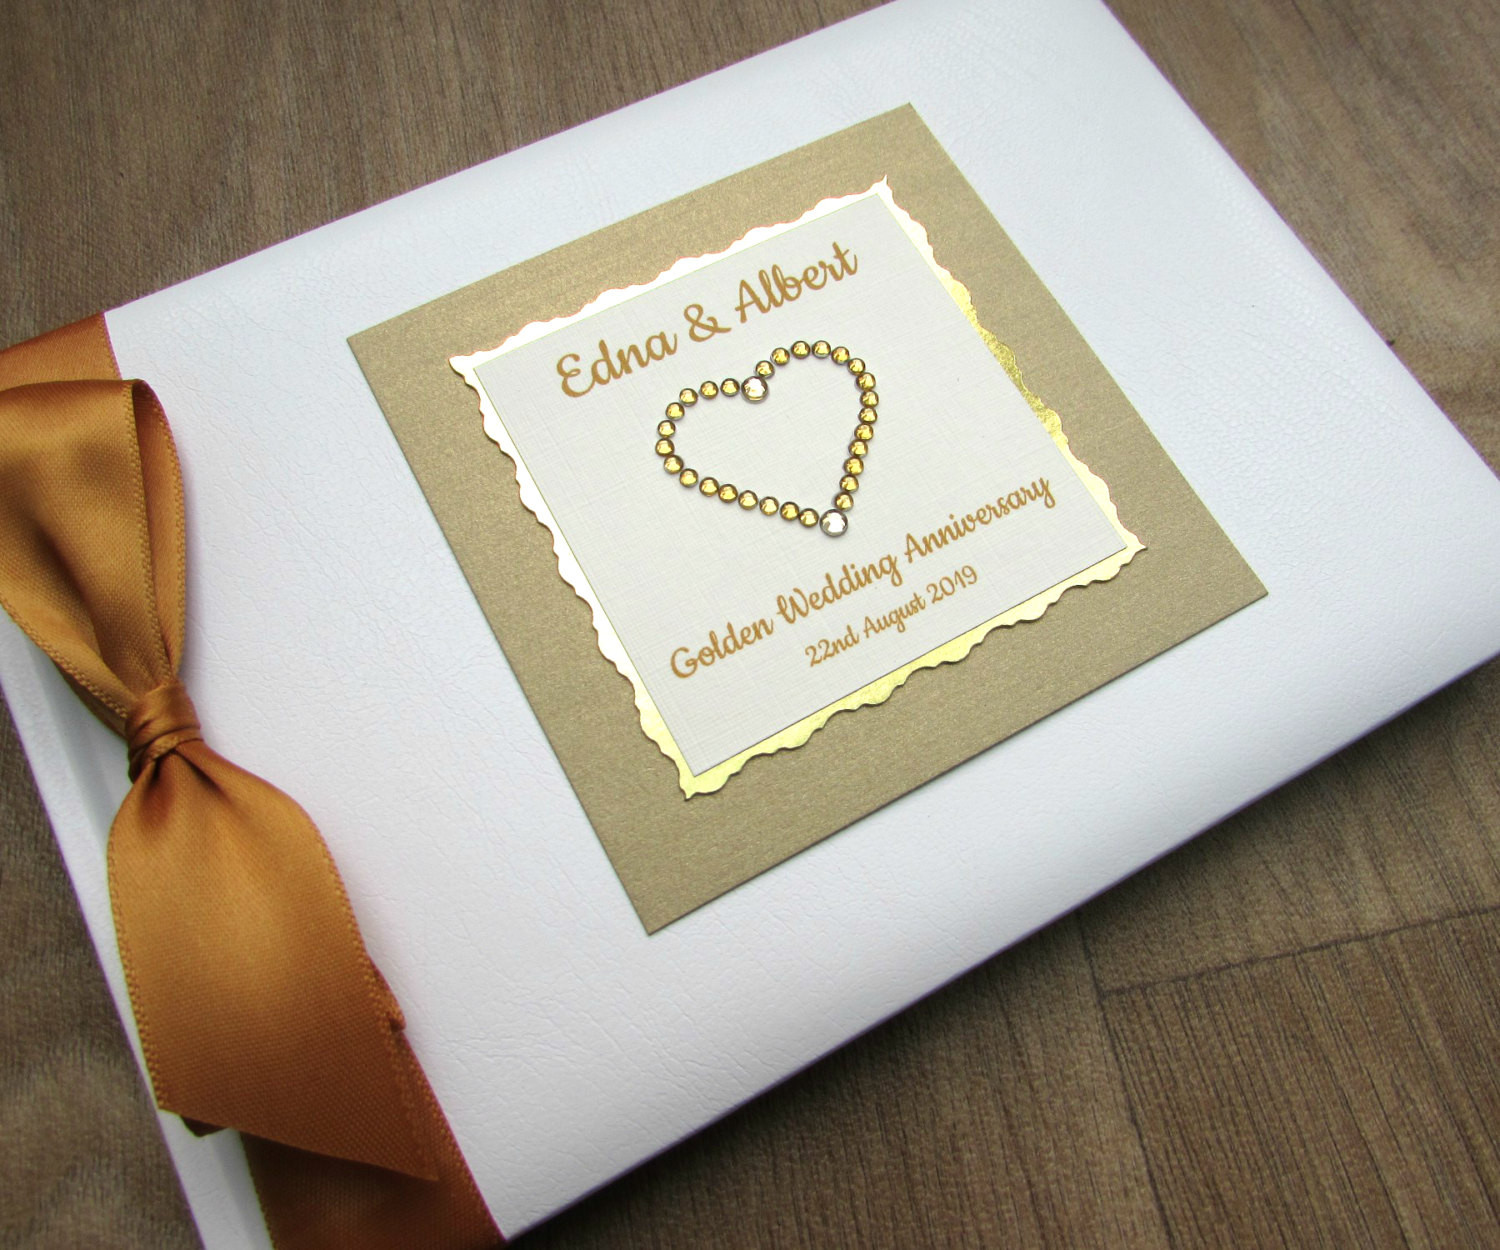 Guest Book For 50th Wedding Anniversary
 Golden 50th Wedding Anniversary Guest Book Personalised